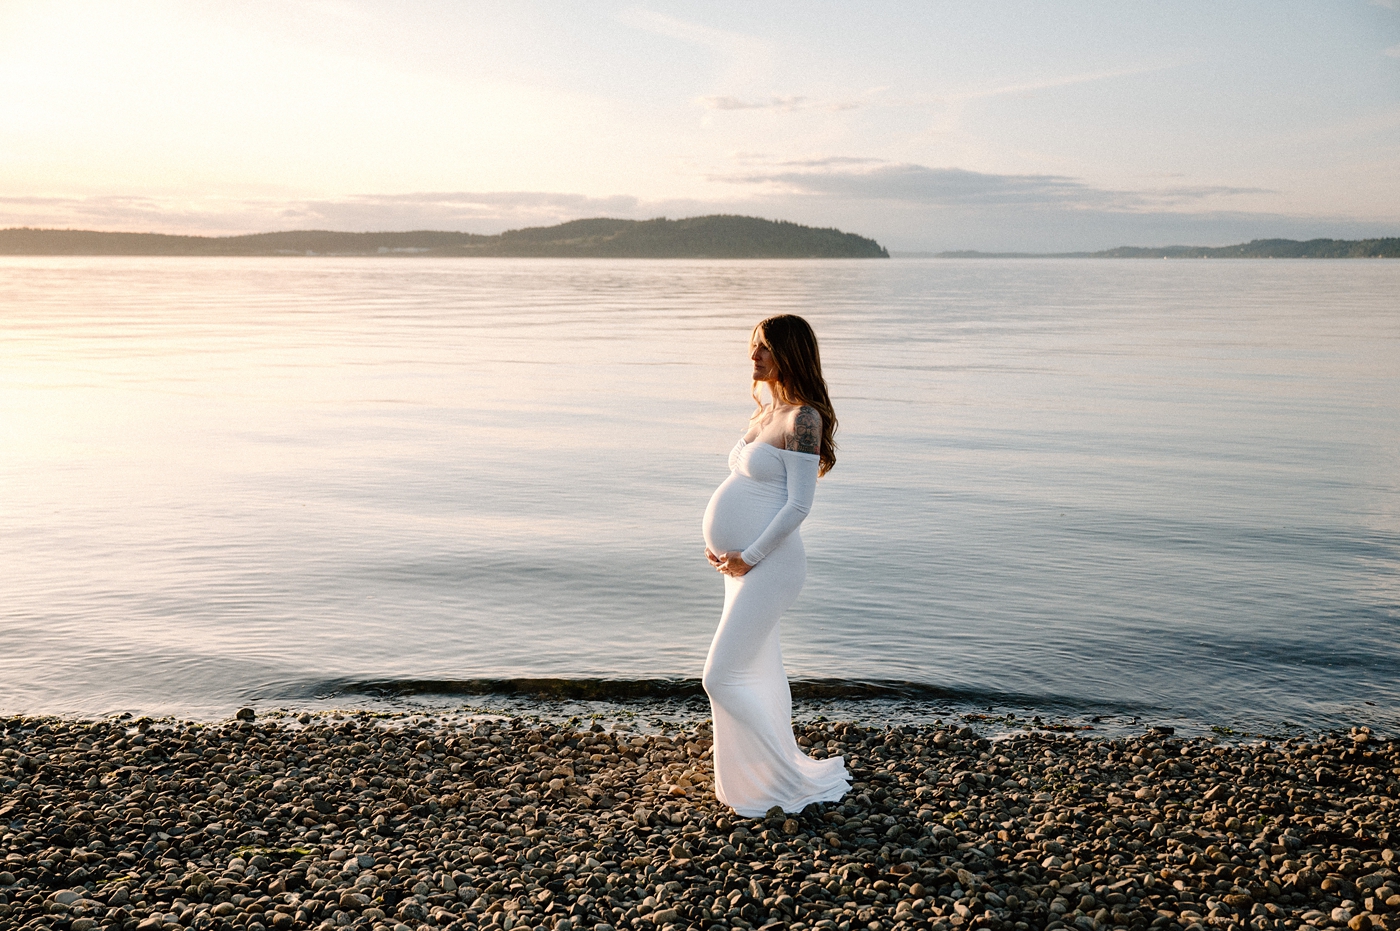 The water behind a new mom to be is still and glowing during her Washington maternity session. Image by PNW maternity photographer Meg Newton.